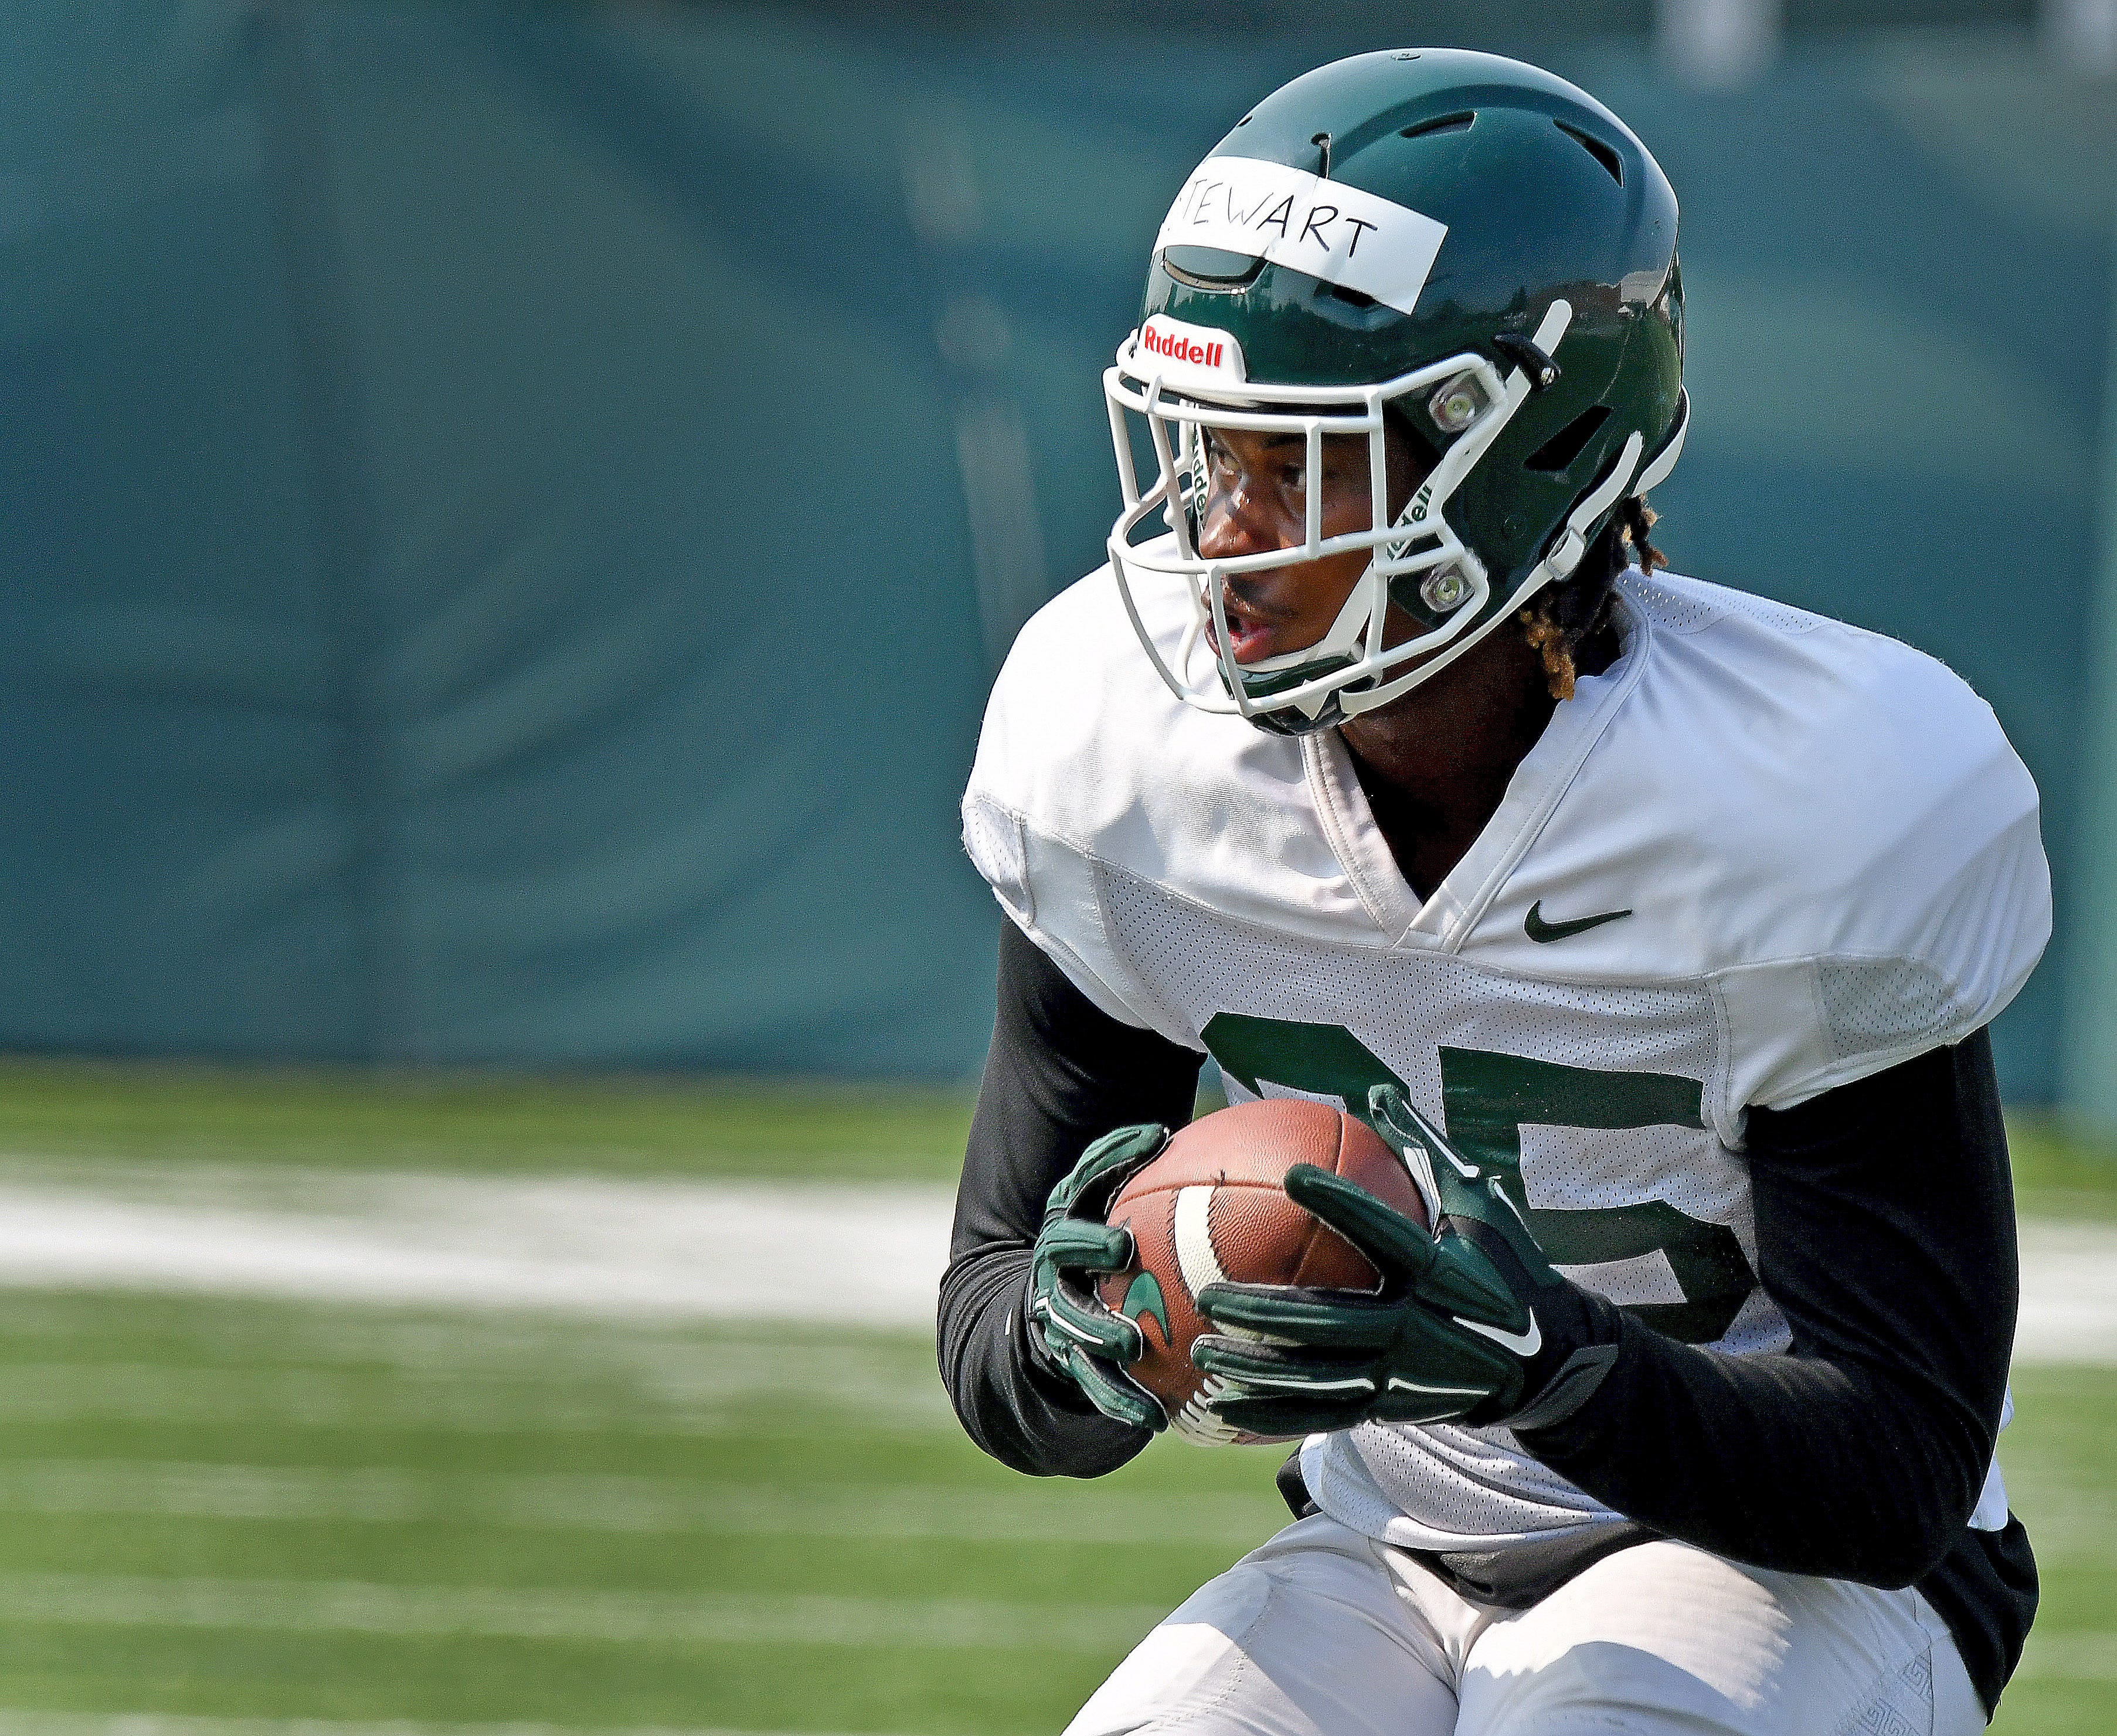 Michigan State receiver Darrell Stewart catches the ball and turns toward the goal line.